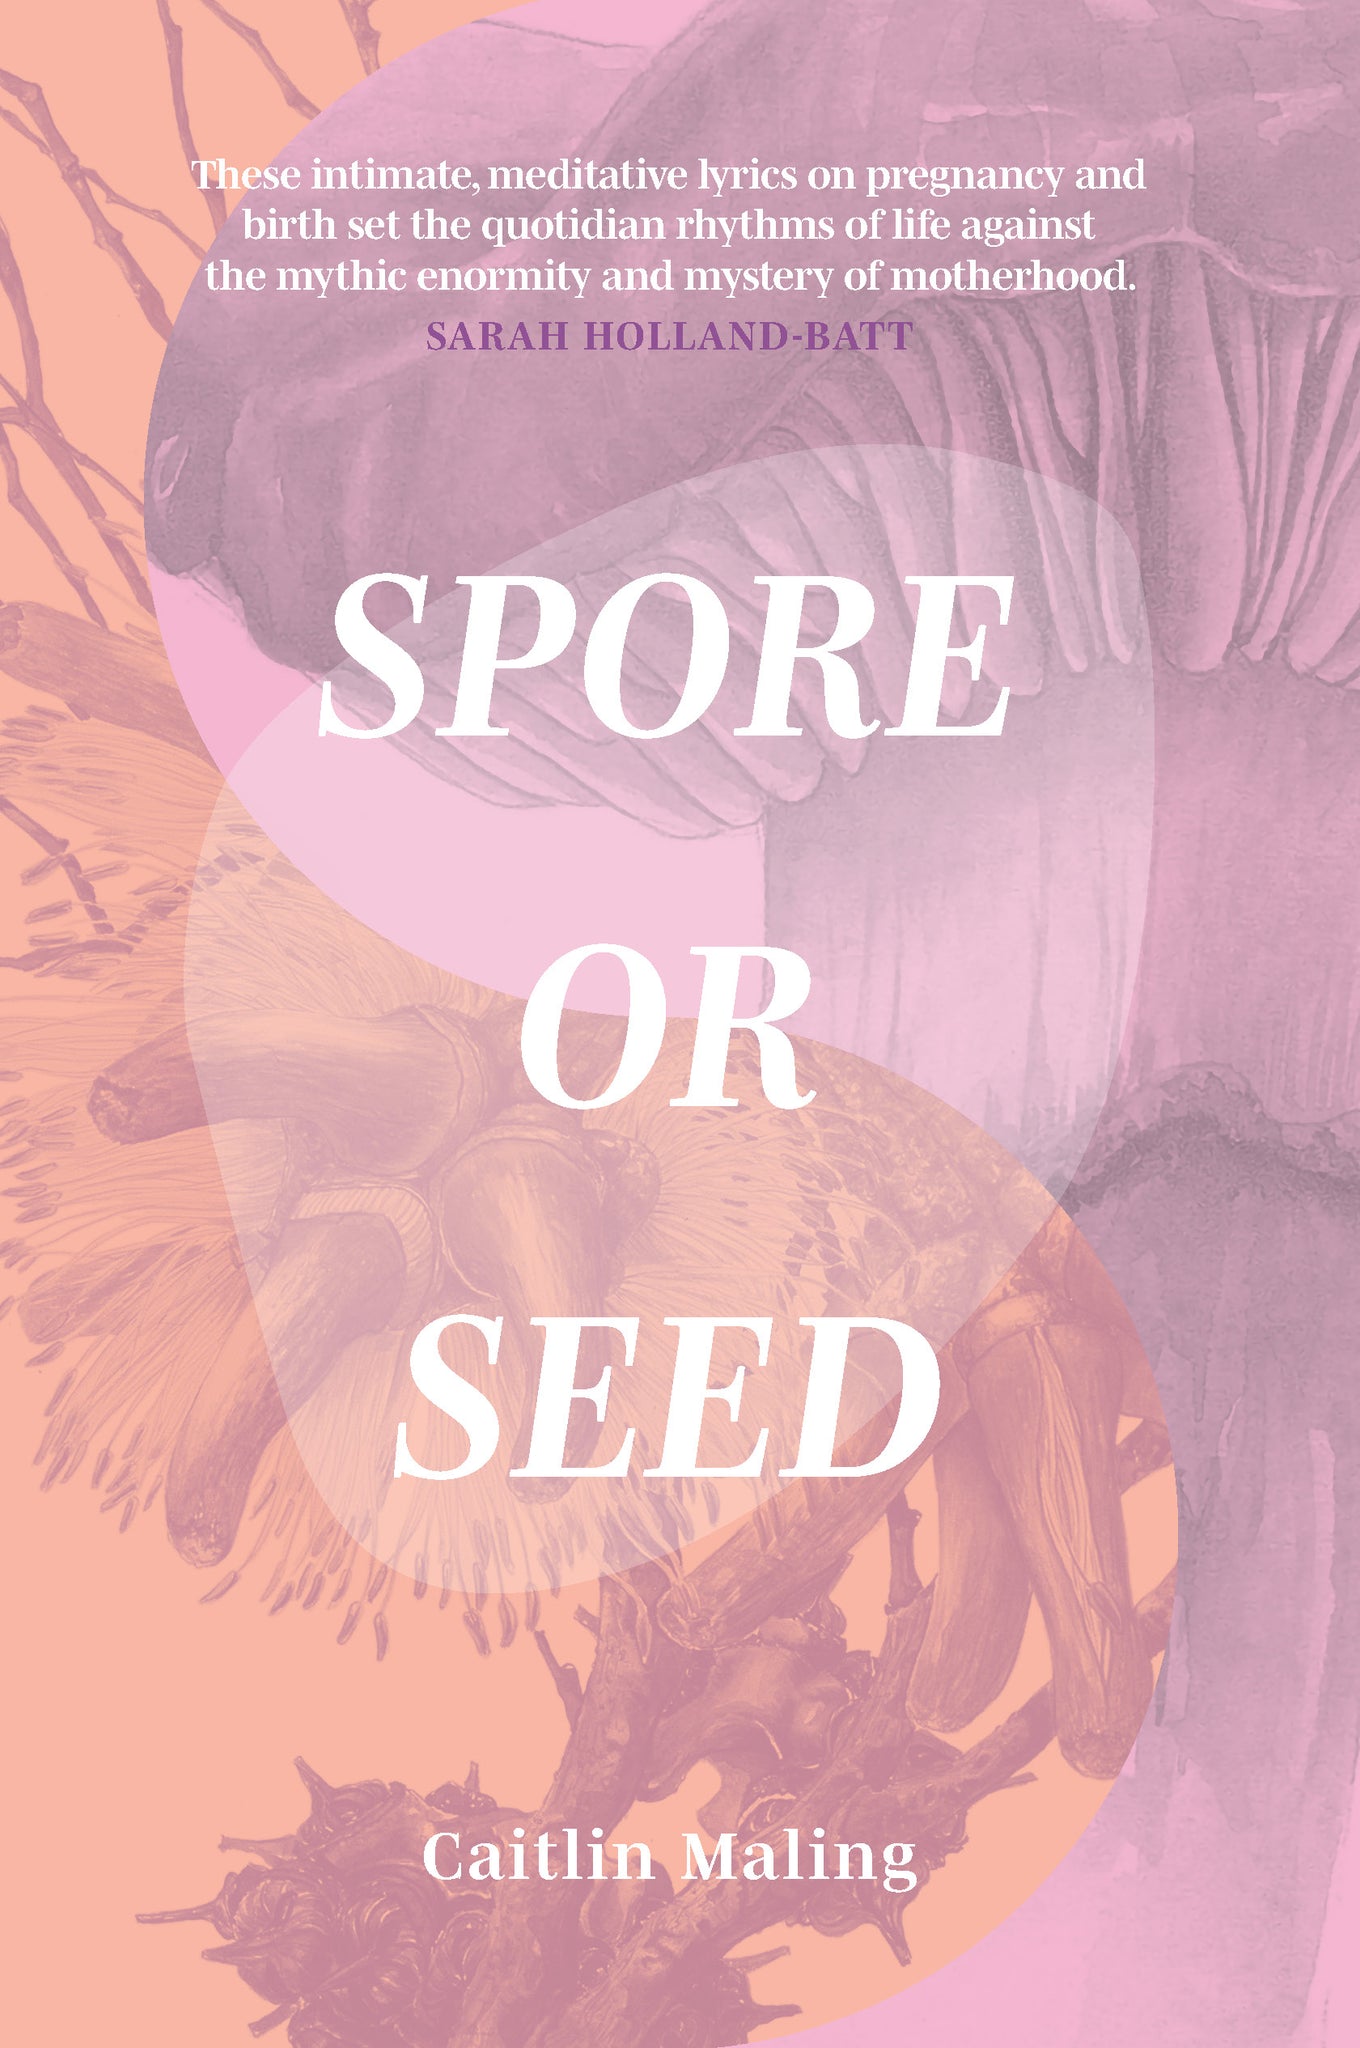 Caitlin Maling - 'Spore or Seed' Softcover book (m/fac036)